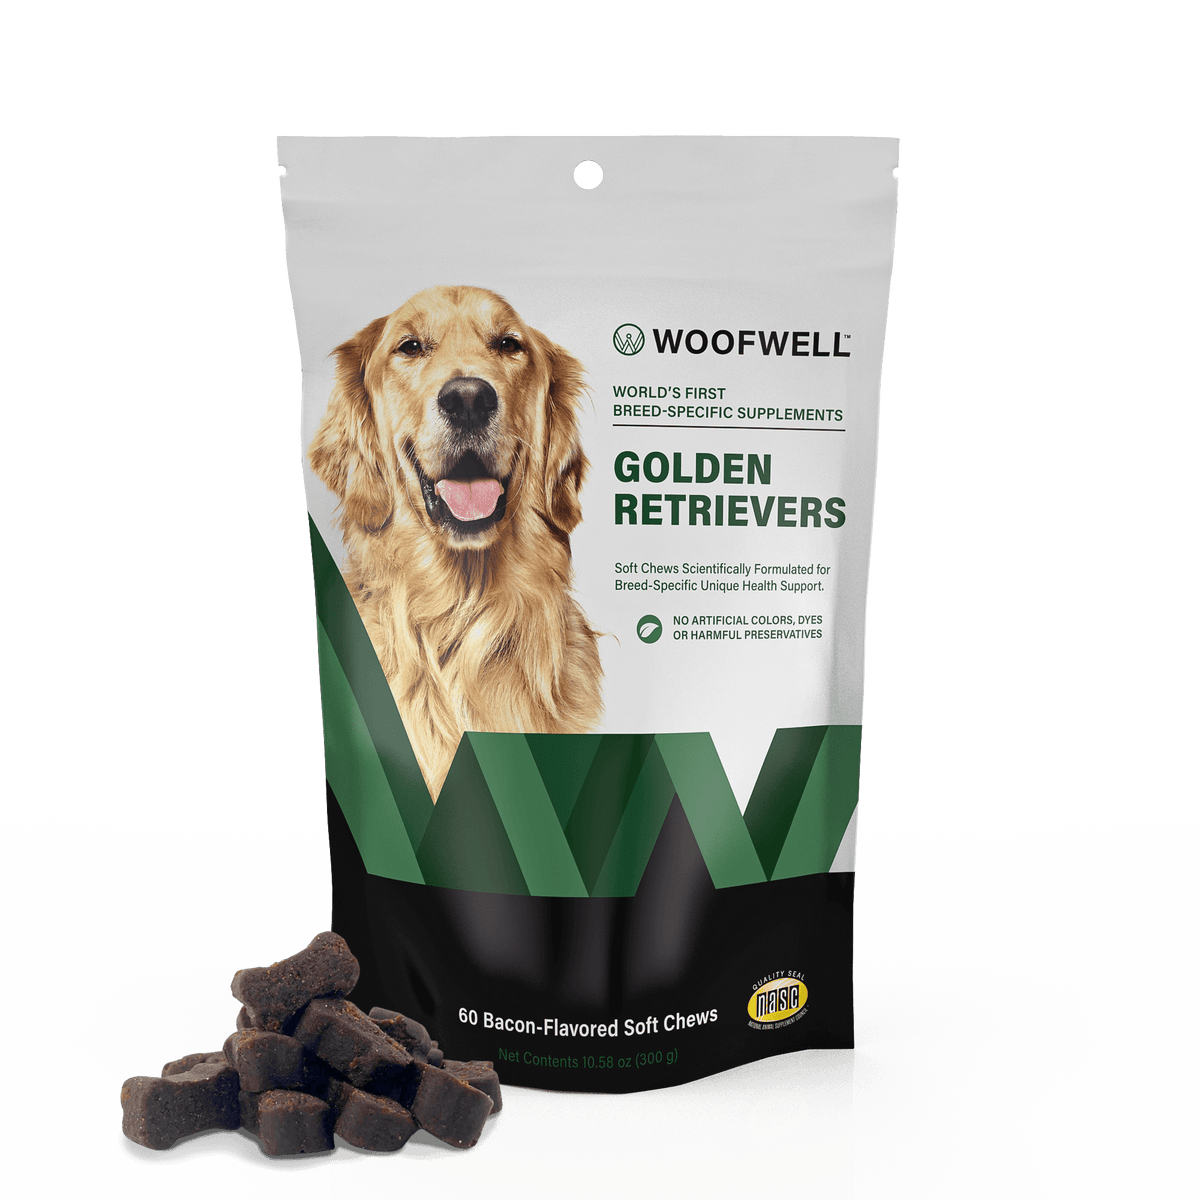 Golden Retriever Supplement package- WoofWell Breed-Specific Dog Health Supplements